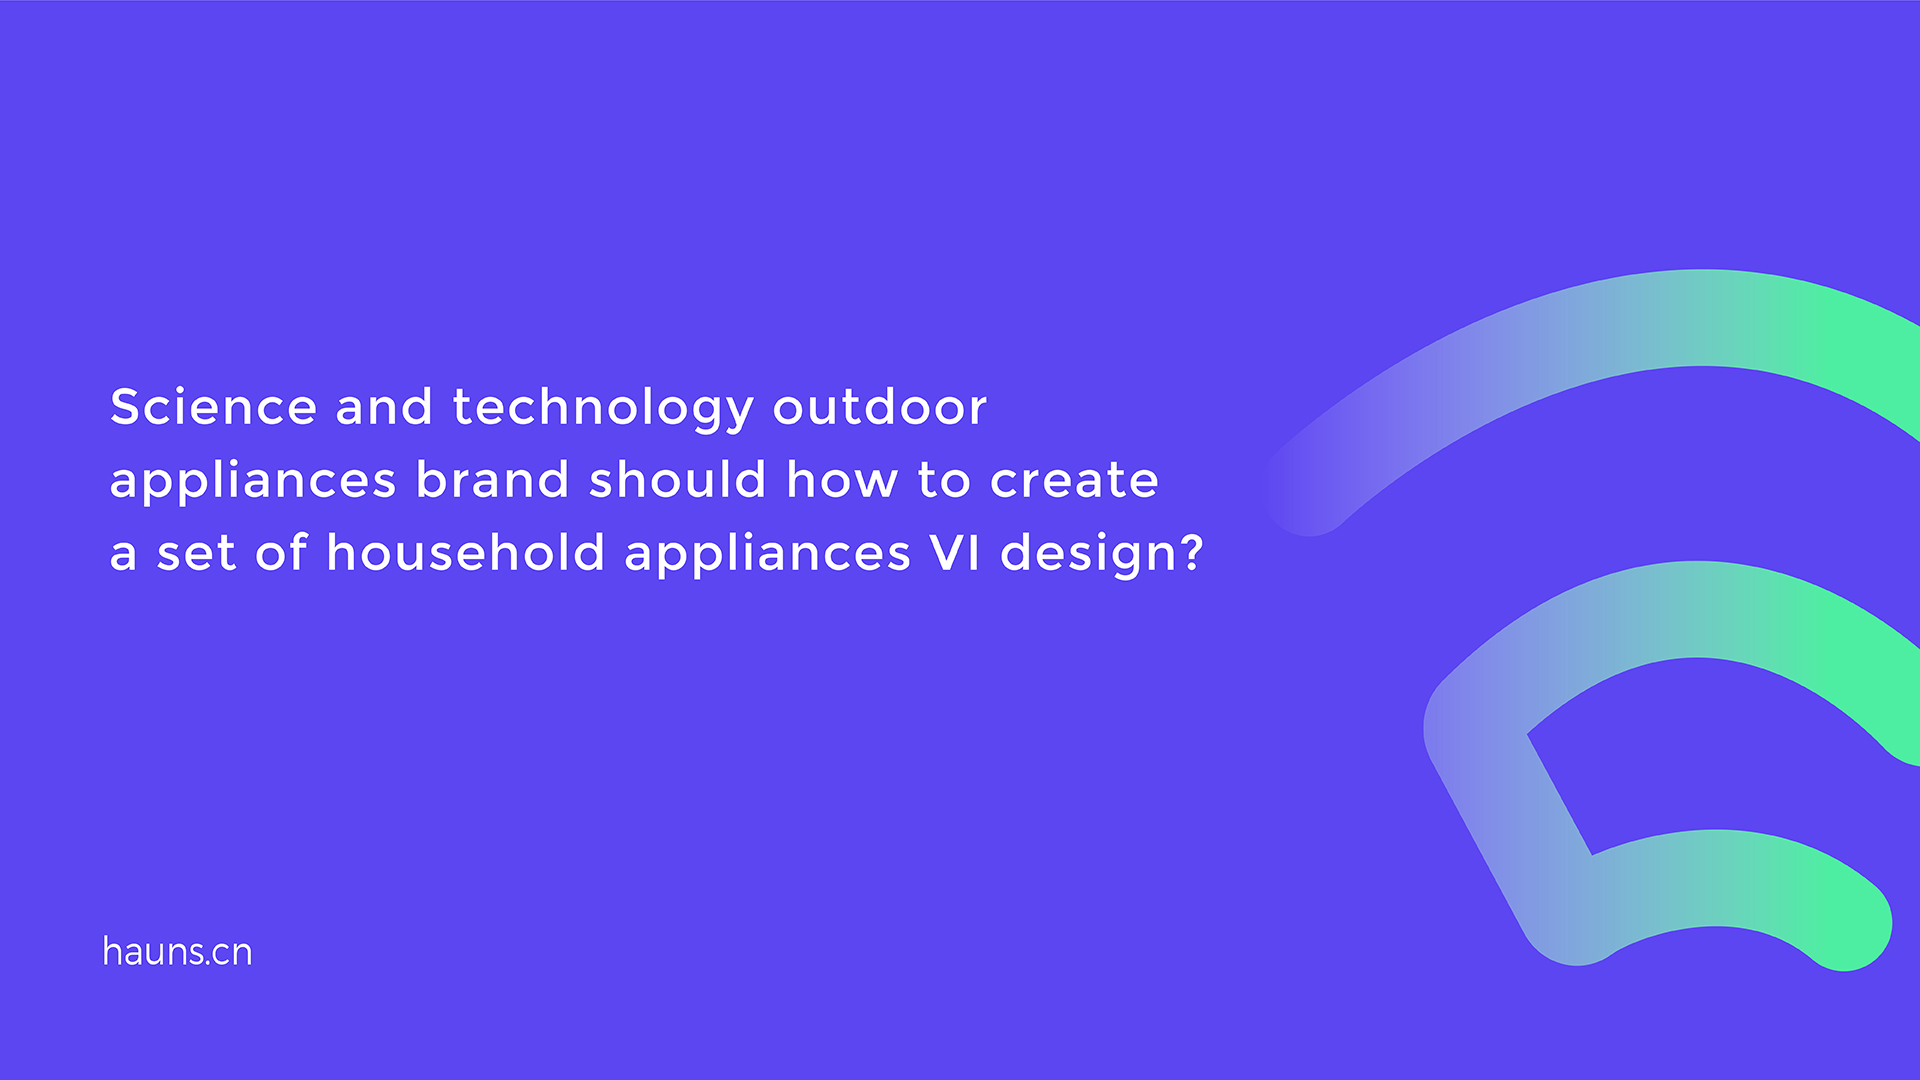 Vi design of household appliances _ brand design of scientific and technological outdoor appliances _ whole case planning of small appliances